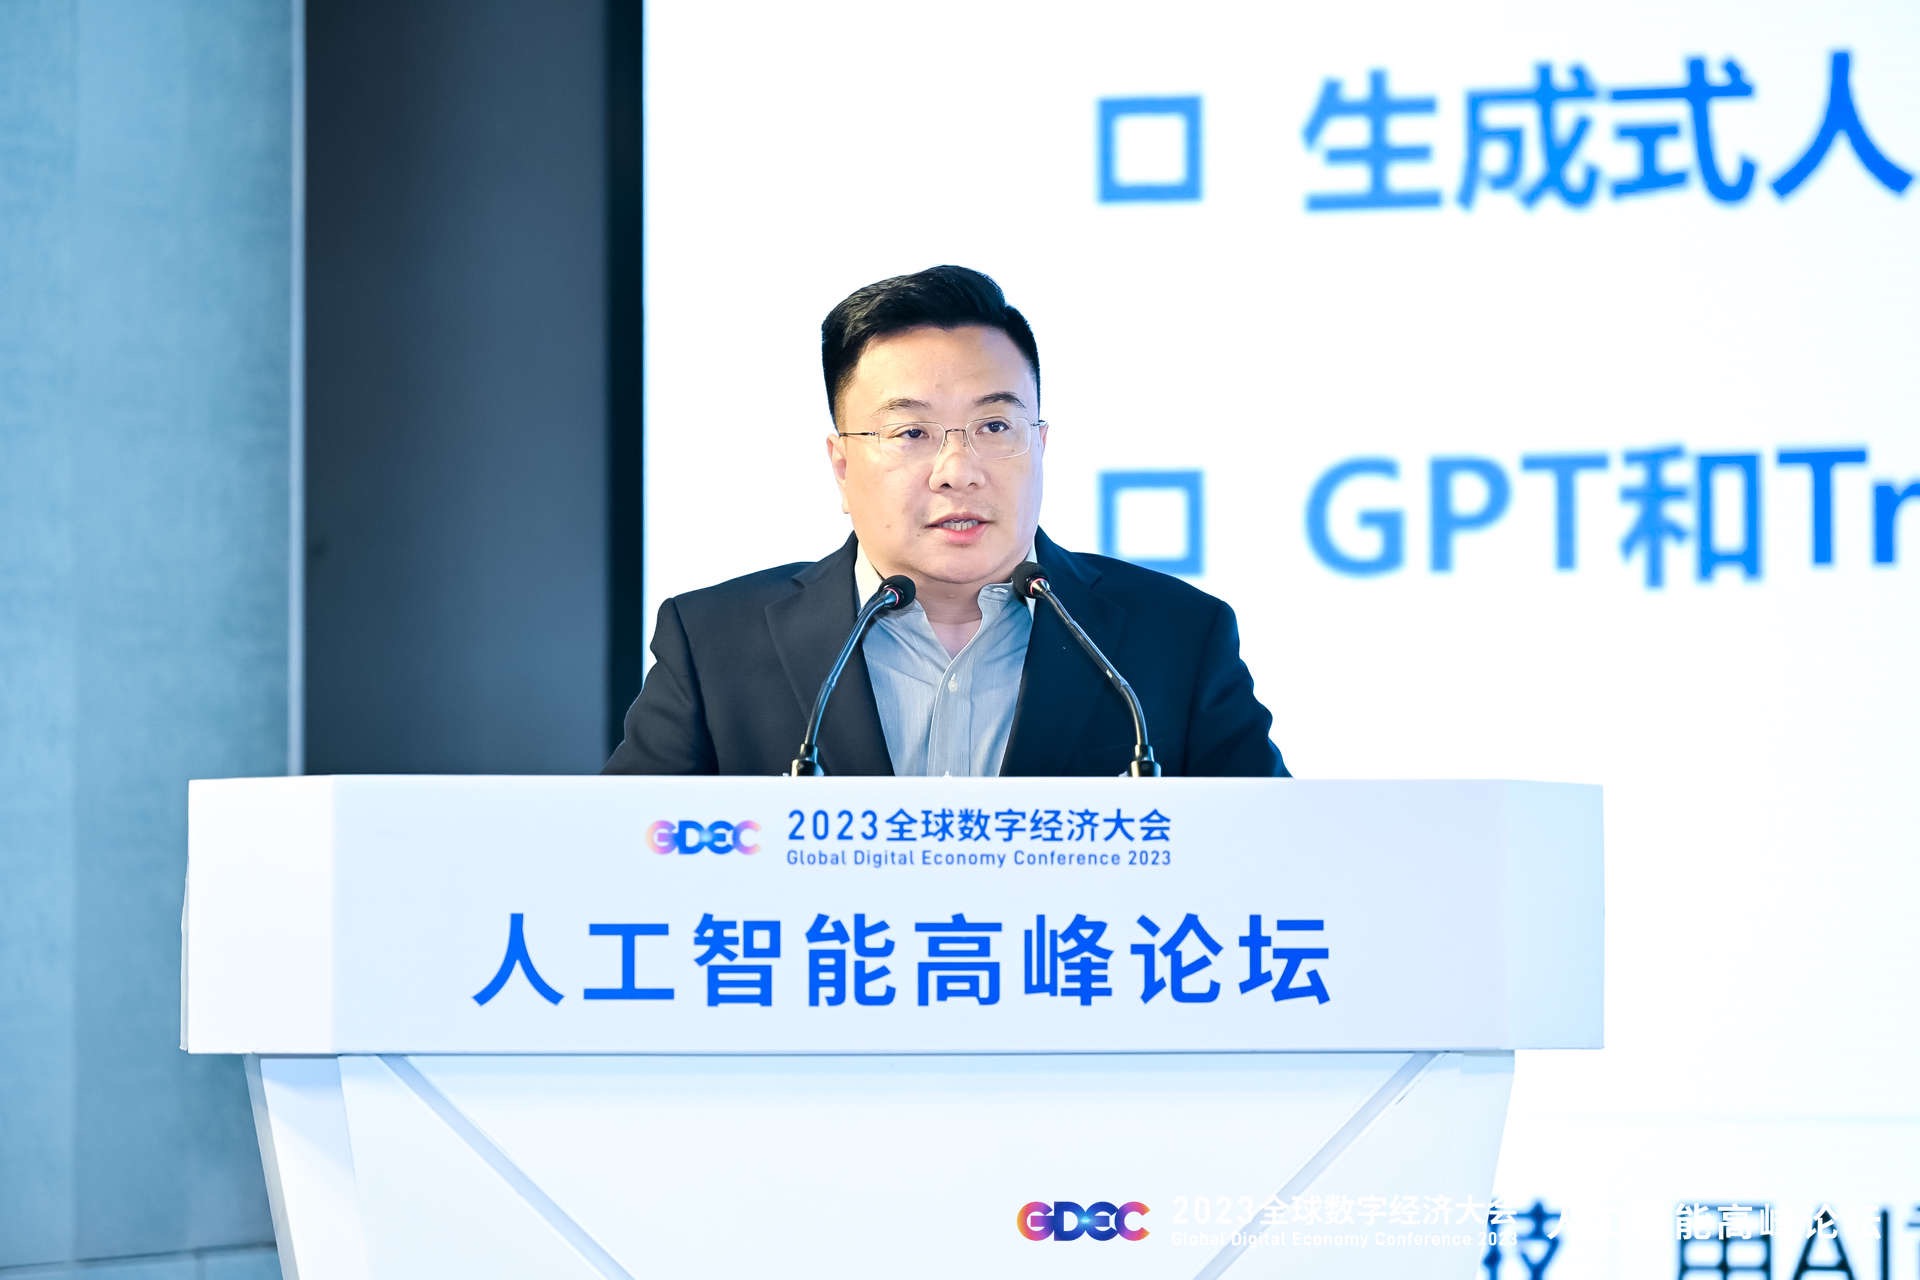 AI experts and corporate CEOs share their latest insights and progress at Beijing’s AI Summit attracting millions of online viewers“mile米乐m6”(图7)